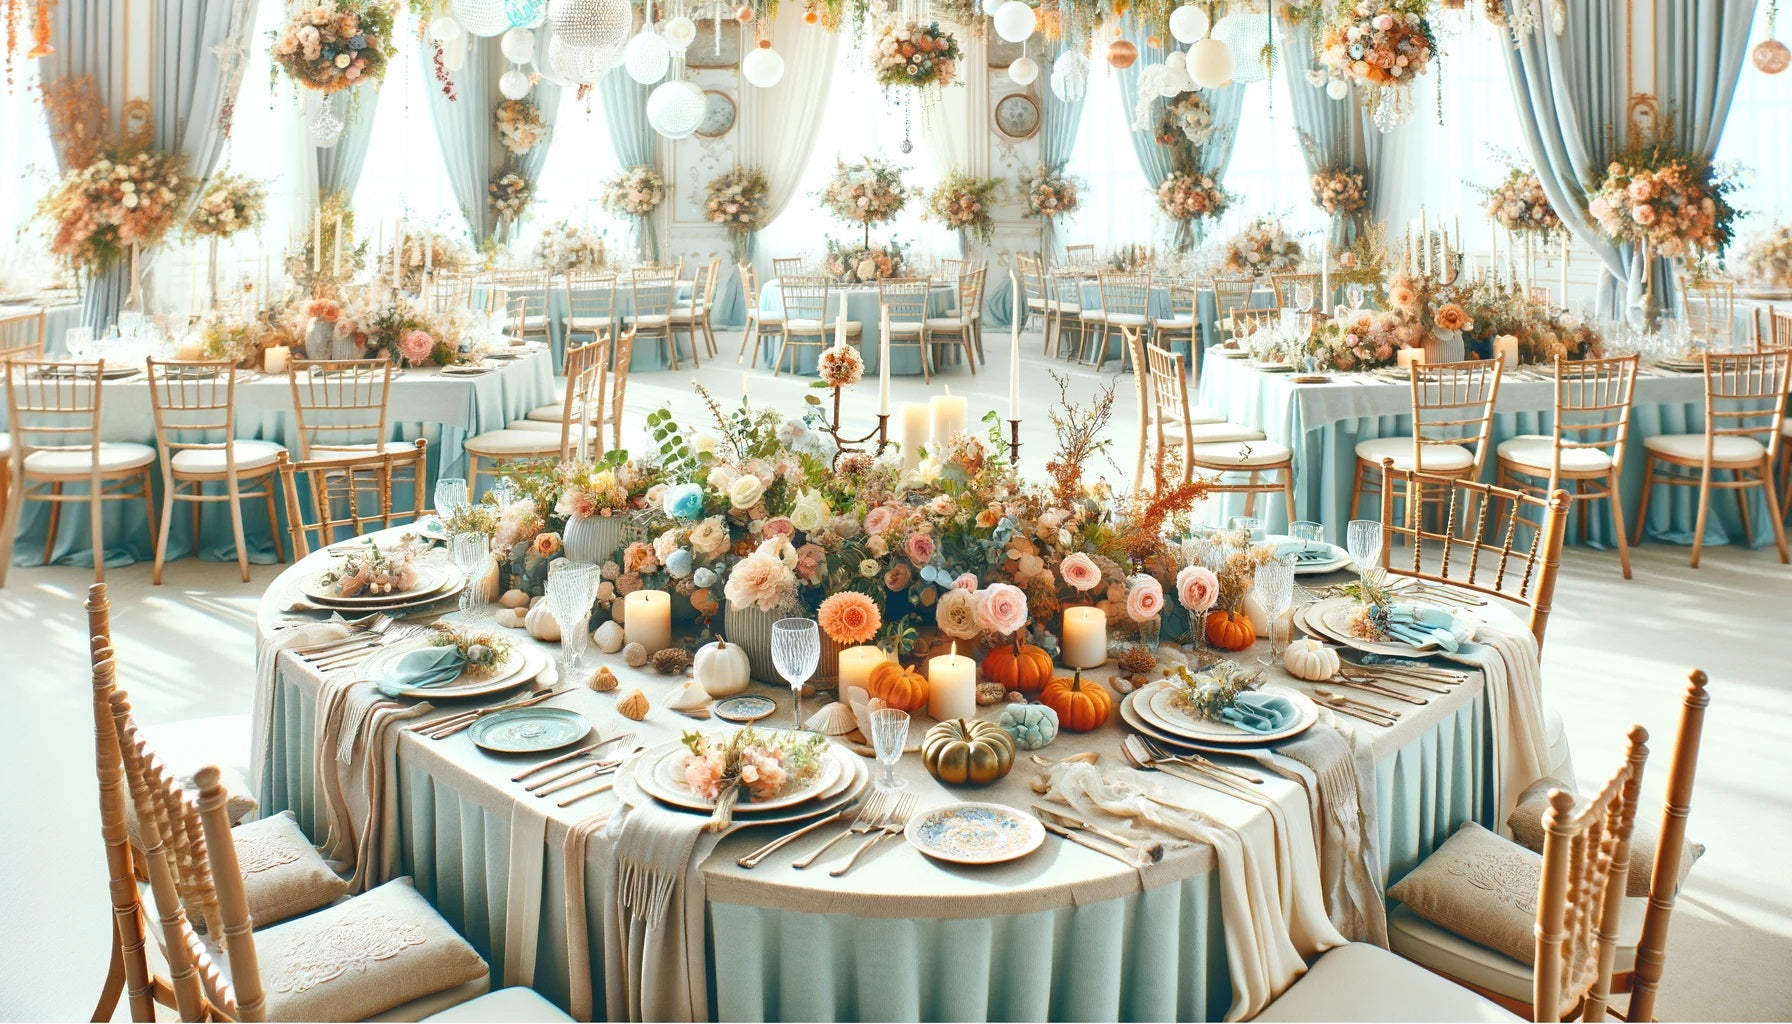  A beautifully decorated wedding table setting. Spring_ A garden-themed setup with pastel-colored tablecloths, floral centerpieces.